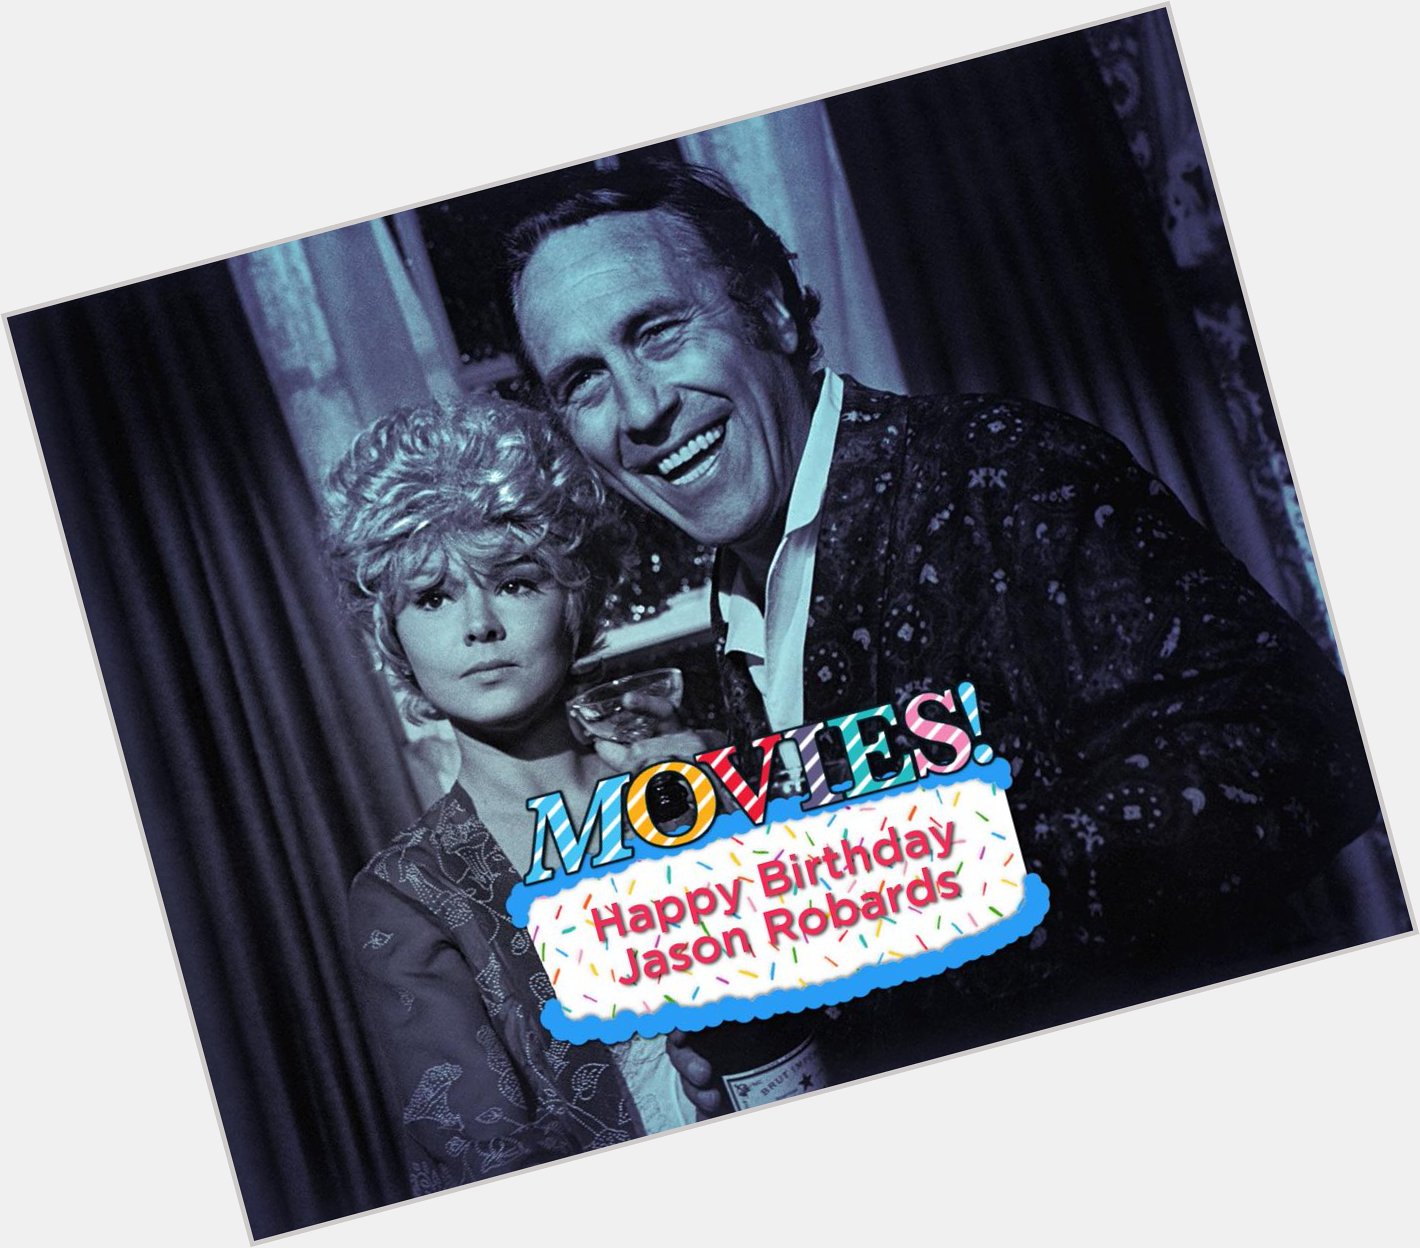 Happy Birthday Jason Robards!

And happy belated to Barbara Harris (July 25)!

Know what film this is from? 